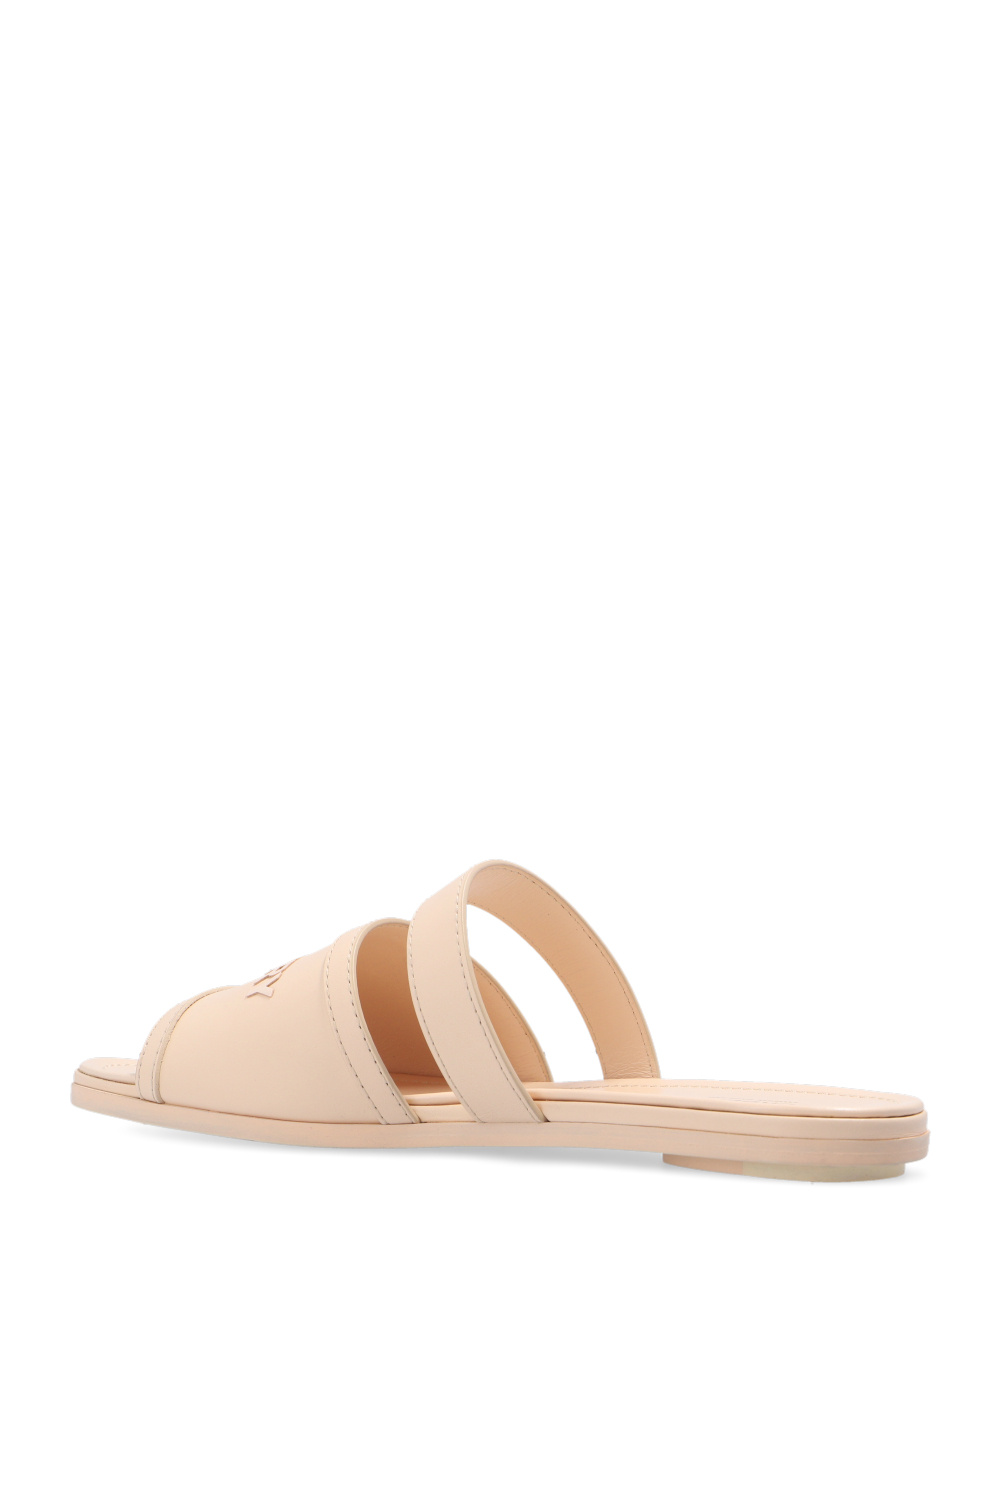 Burberry Leather slides with logo | Women's Shoes | Vitkac